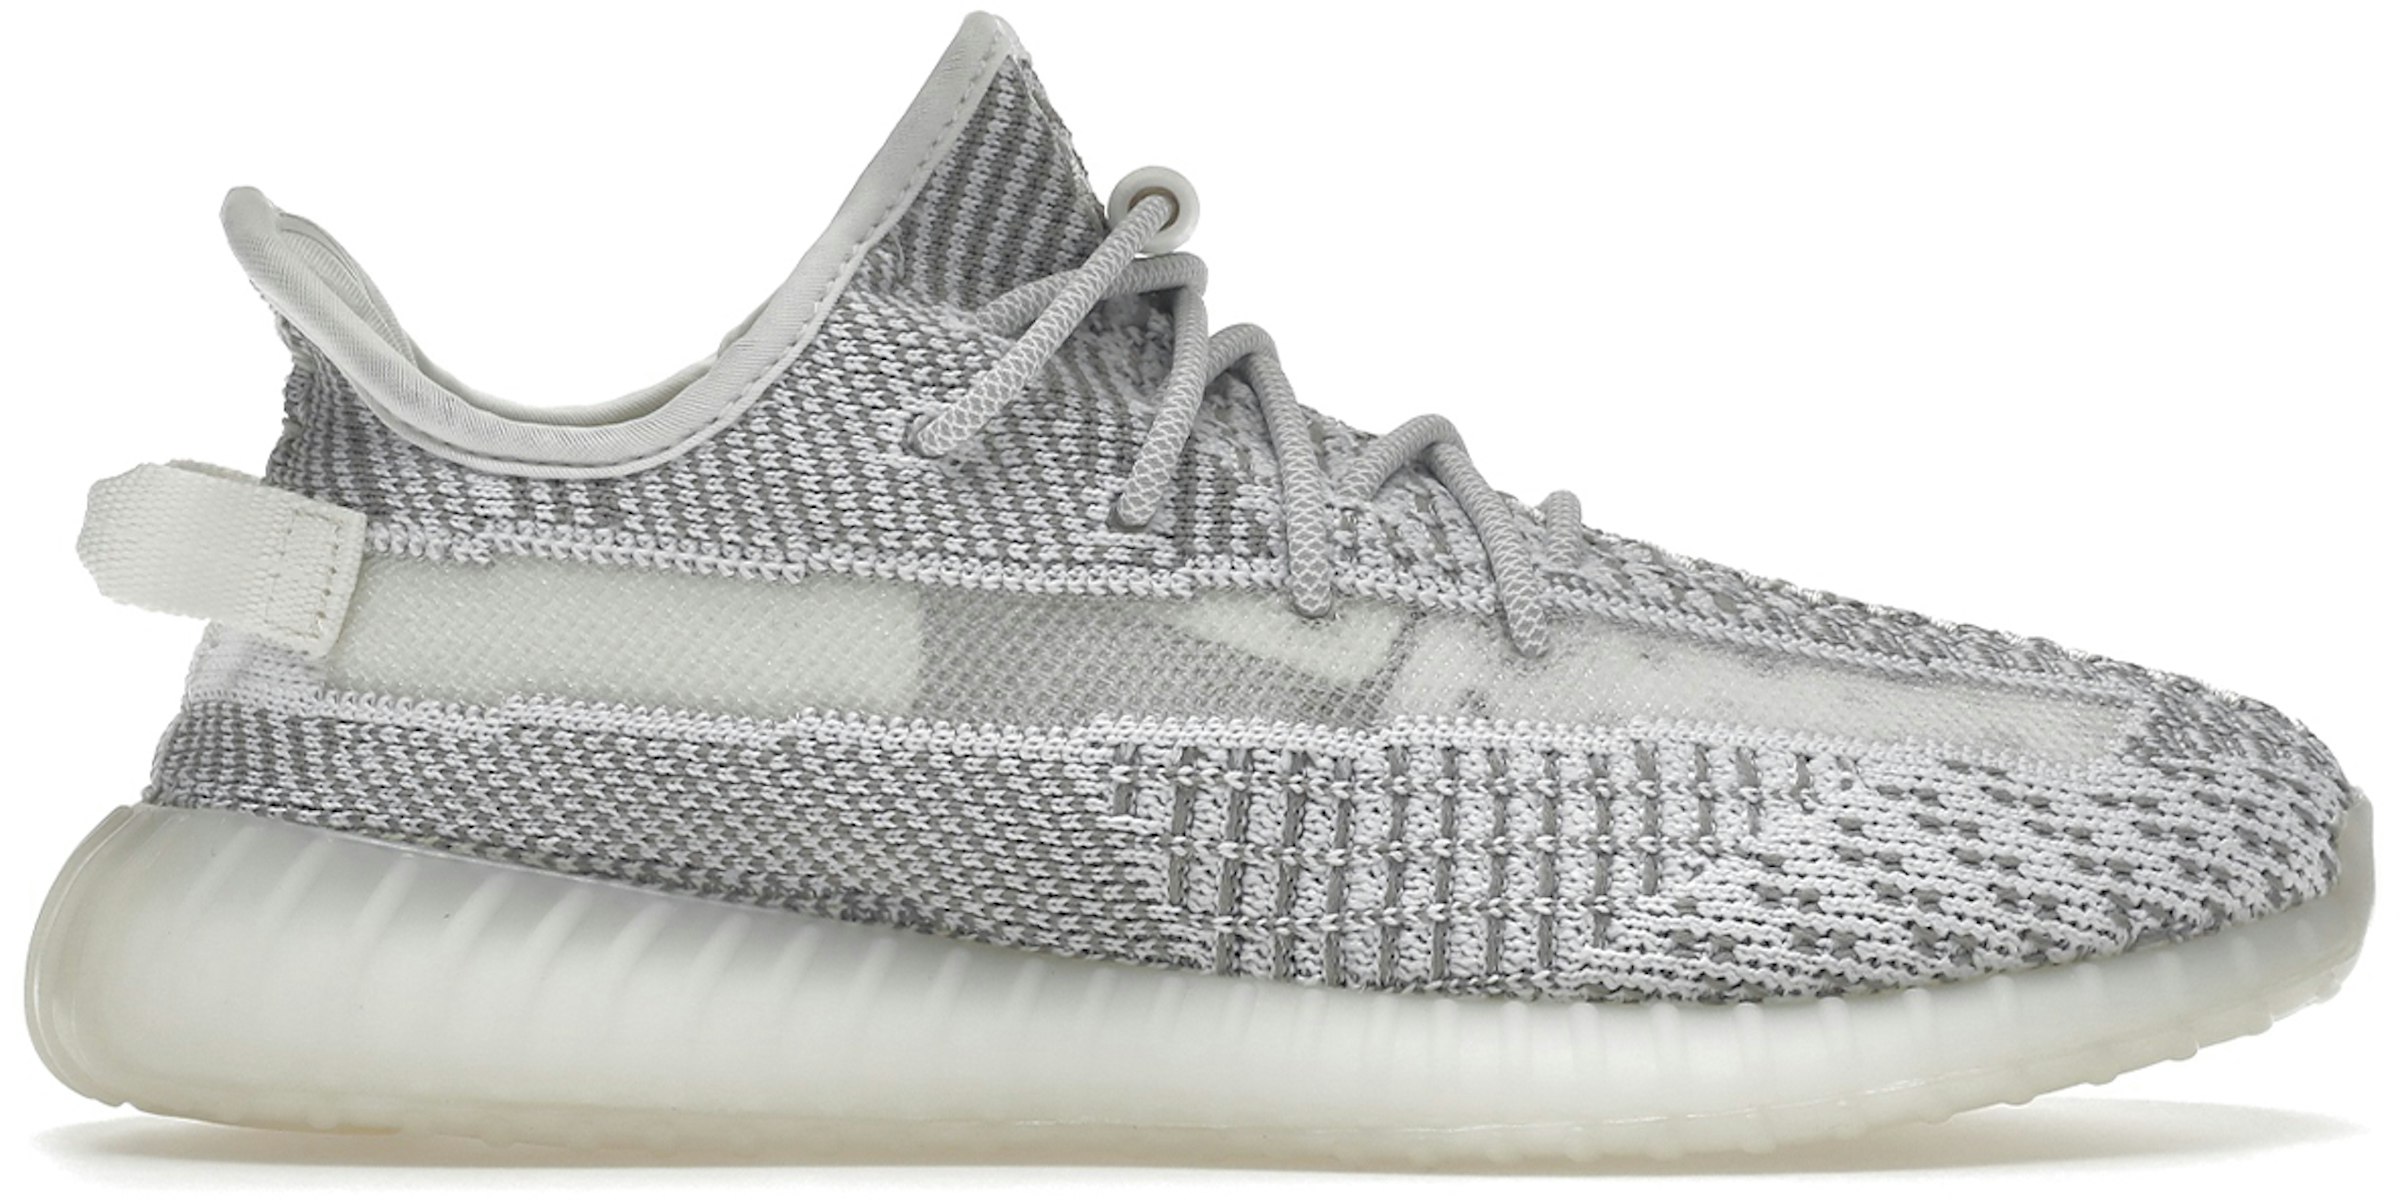 adidas Yeezy Boost 350 Static (Non-Reflective) (Kids) Kids' - HP6594 - US